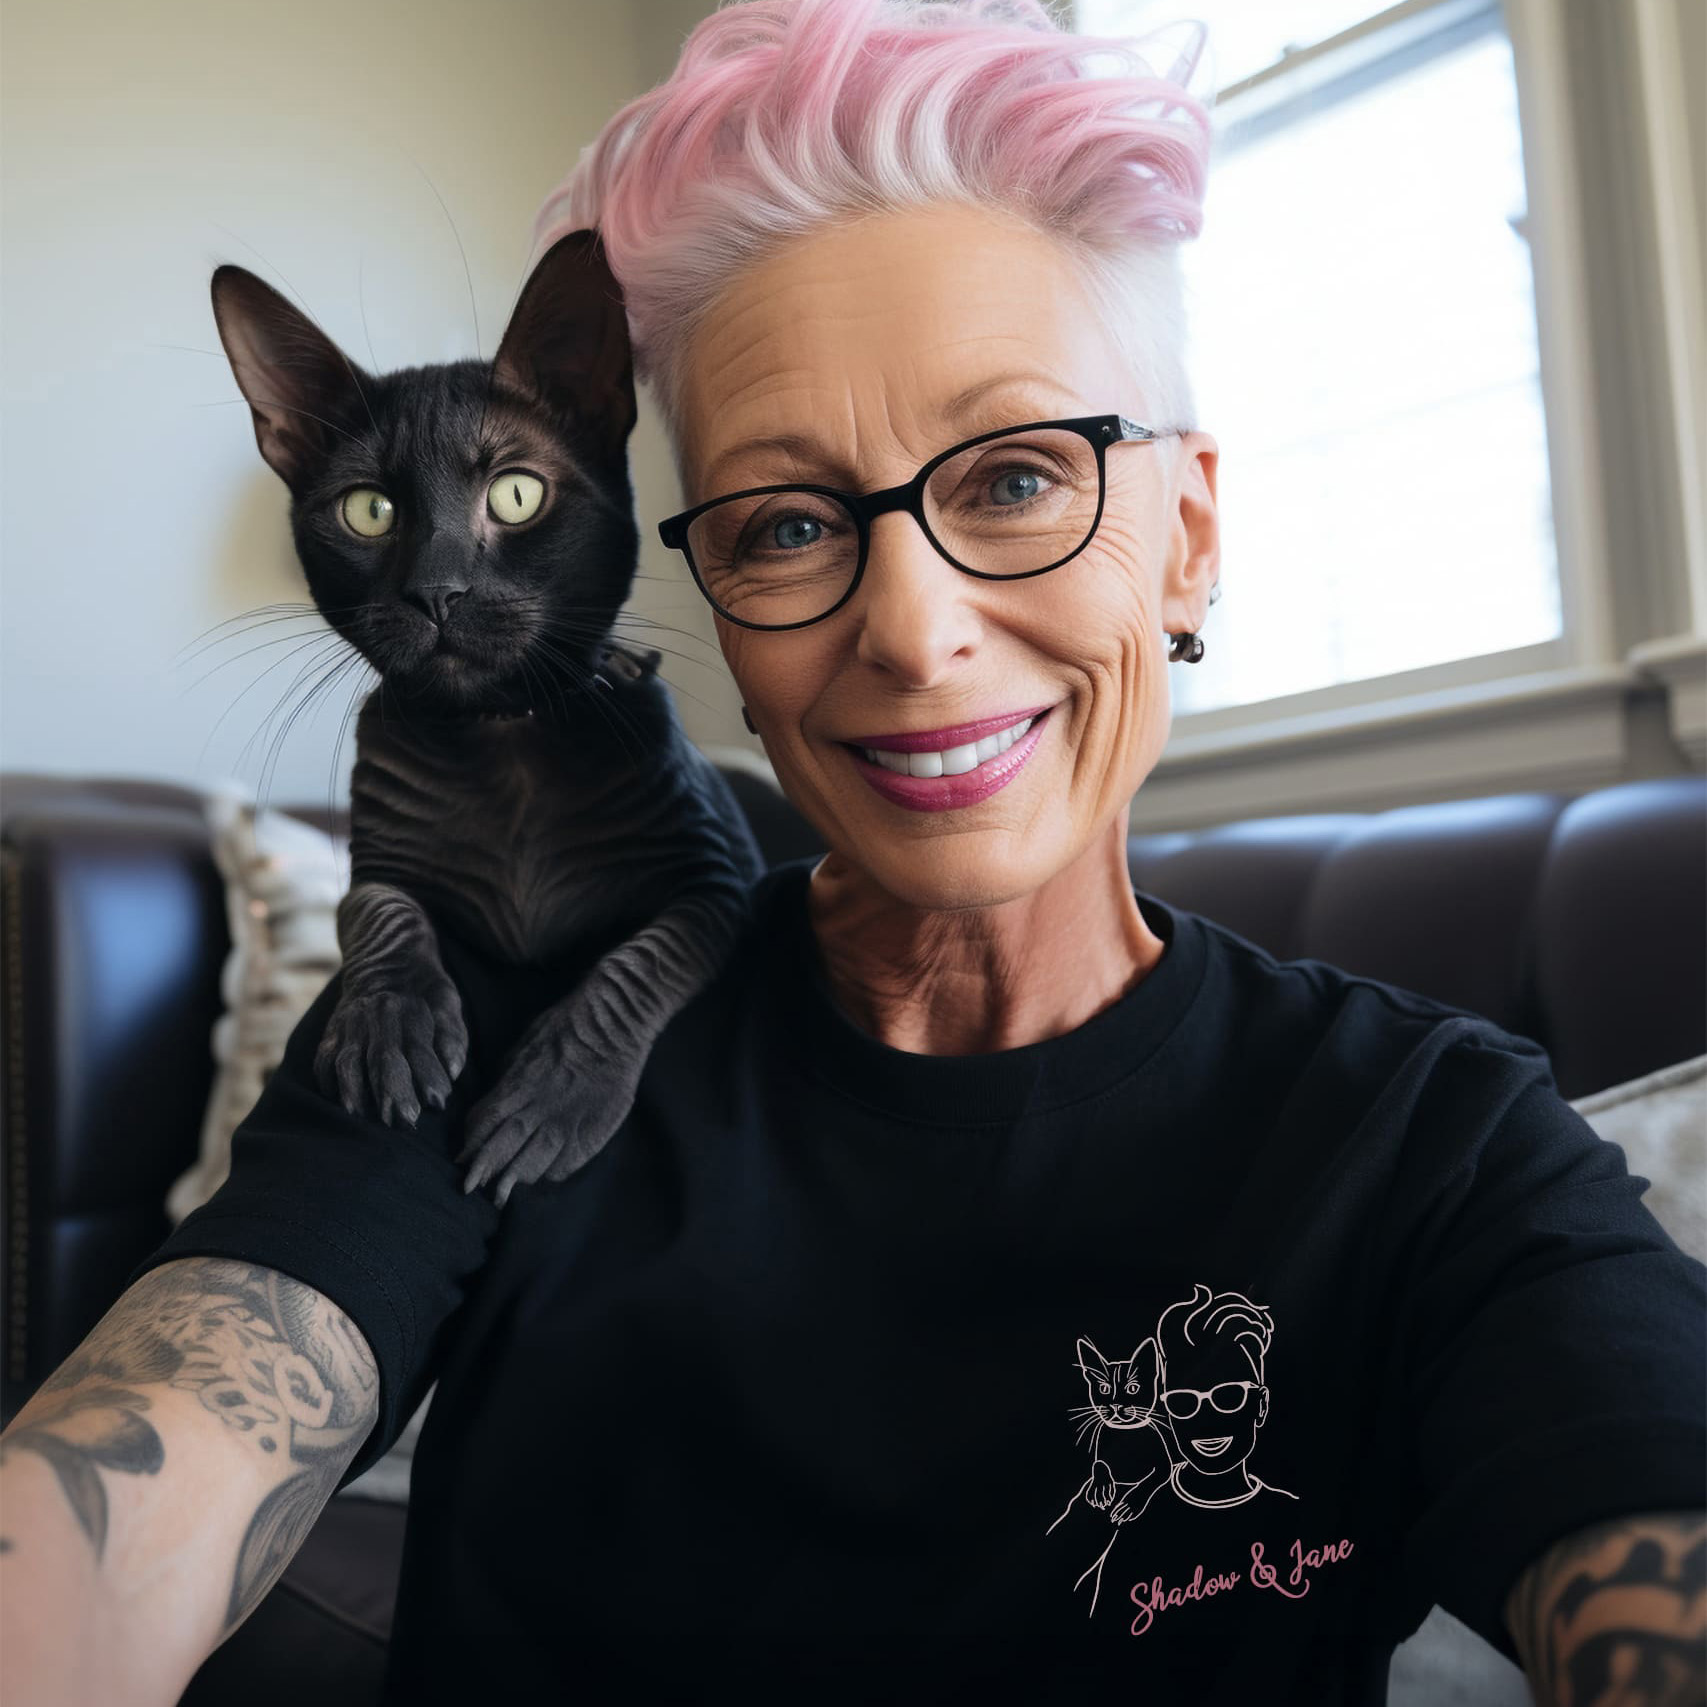 custom Tshirt for cat moms with portrait of her and her cat plus their names